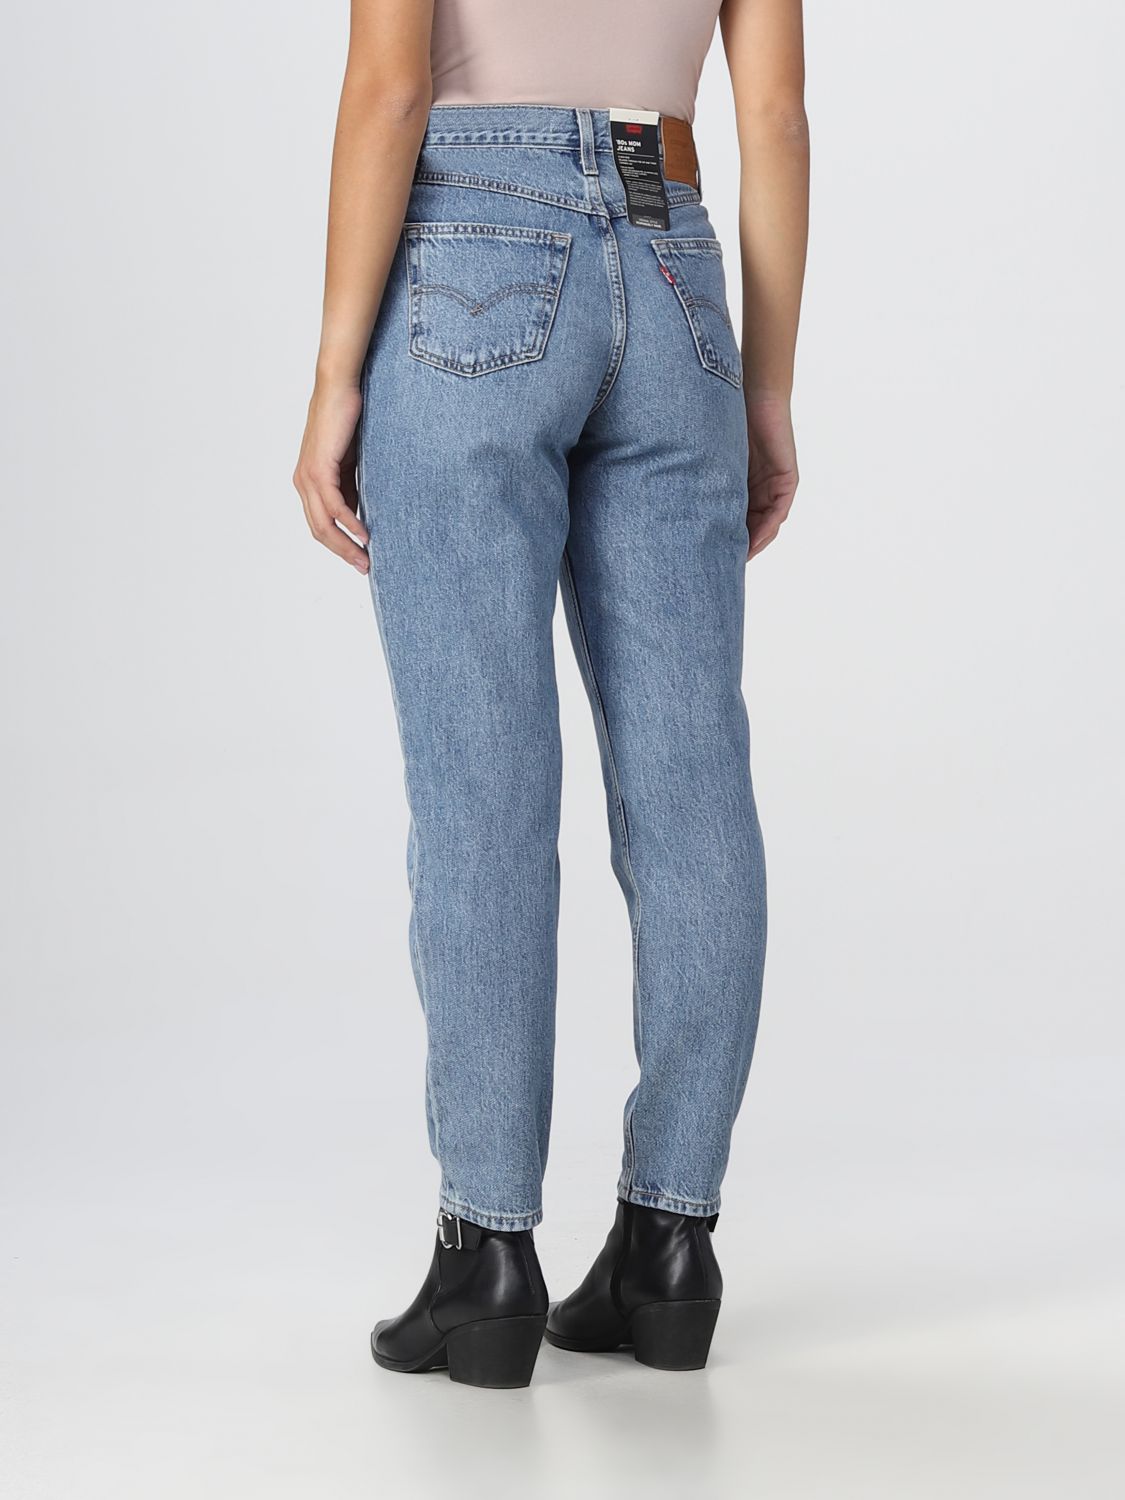 LEVI'S: jeans for woman - Navy | Levi's jeans A35060002 online on 